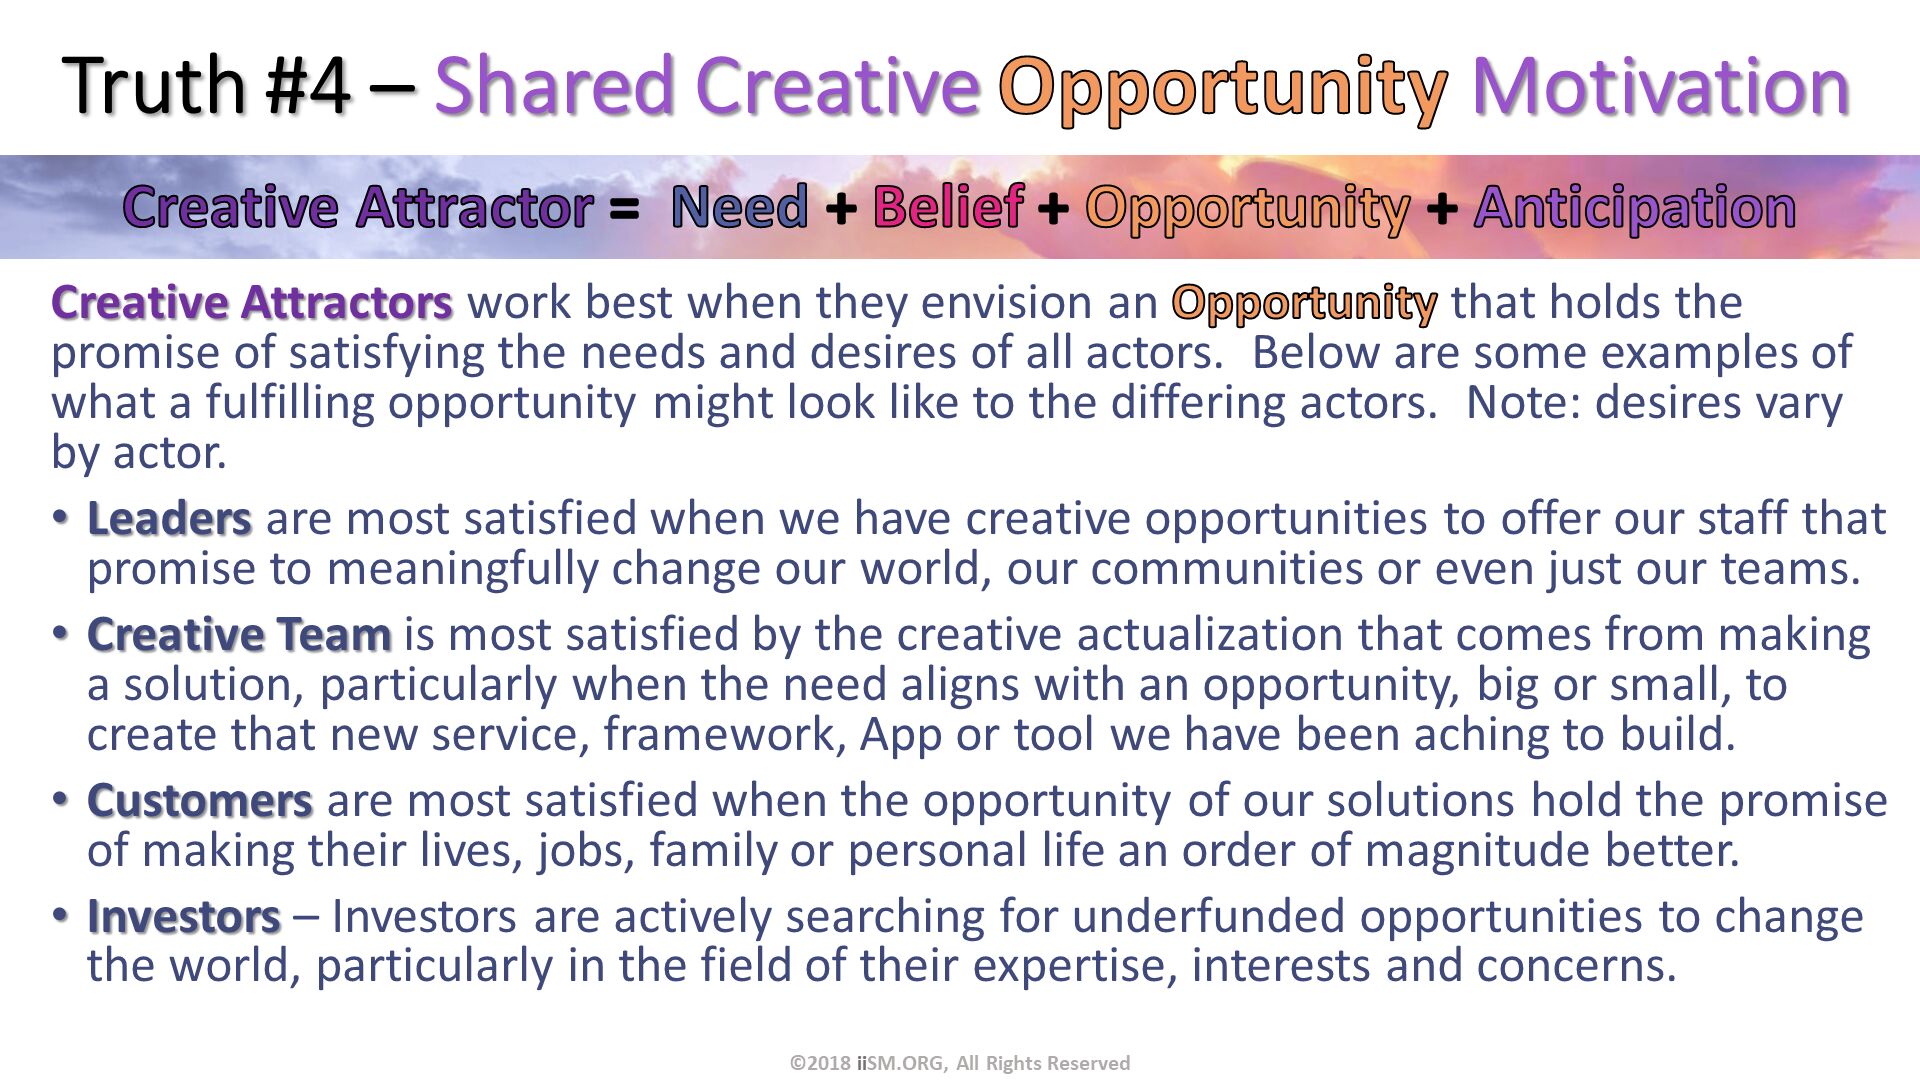 Truth #4 – Shared Creative Opportunity Motivation. Creative Attractors work best when they envision an Opportunity that holds the promise of satisfying the needs and desires of all actors.  Below are some examples of what a fulfilling opportunity might look like to the differing actors.  Note: desires vary by actor.
Leaders are most satisfied when we have creative opportunities to offer our staff that promise to meaningfully change our world, our communities or even just our teams.
Creative Team is most satisfied by the creative actualization that comes from making a solution, particularly when the need aligns with an opportunity, big or small, to create that new service, framework, App or tool we have been aching to build. 
Customers are most satisfied when the opportunity of our solutions hold the promise of making their lives, jobs, family or personal life an order of magnitude better.
Investors – Investors are actively searching for underfunded opportunities to change the world, particularly in the field of their expertise, interests and concerns. ©2018 iiSM.ORG, All Rights Reserved. 